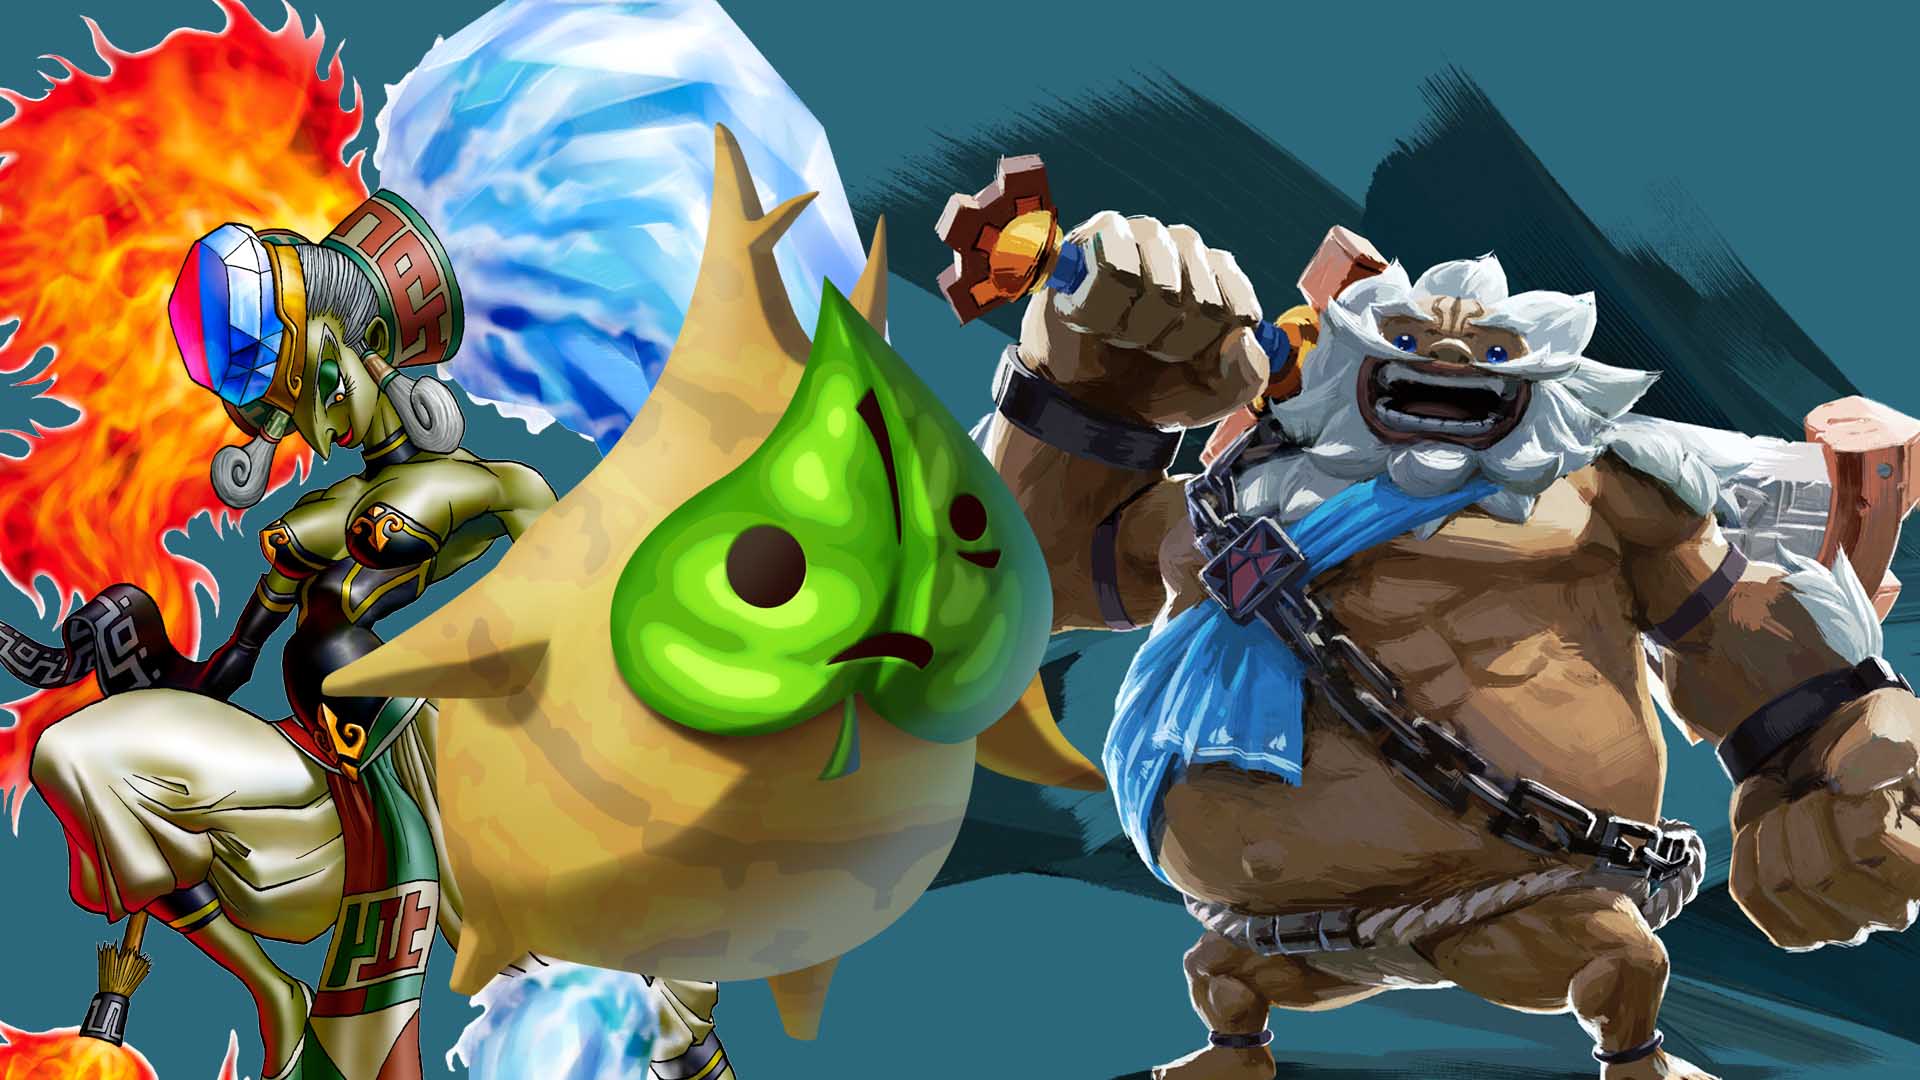 Ten characters we'd love to see in Hyrule Warriors: Definitive